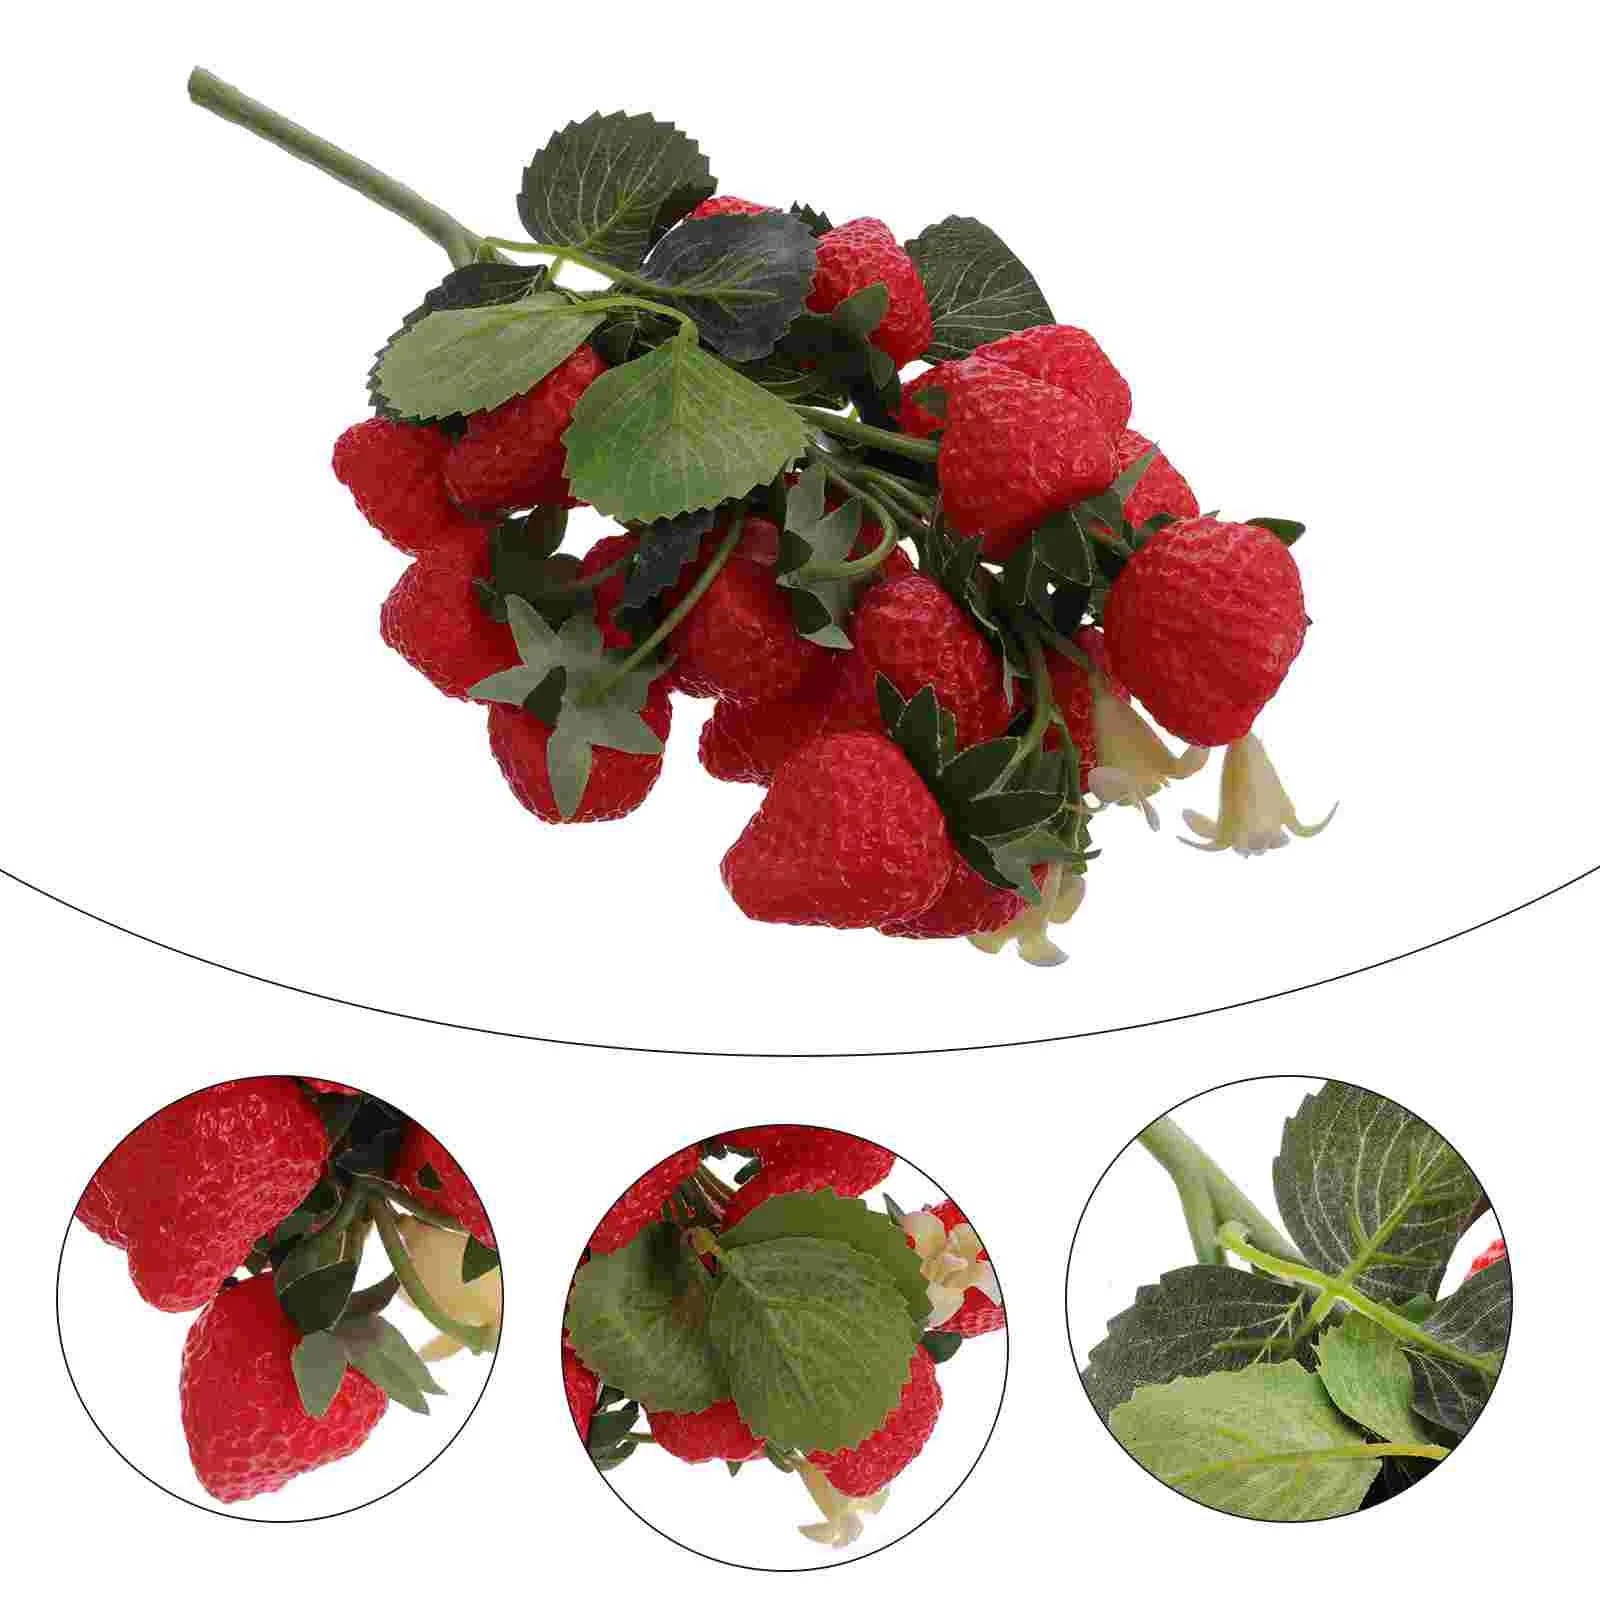 

Fruit Fake Strawberries Artificial Strawberry Decor Red Fruits Lifelike Props Model Simulation Food Photography Faux Foam